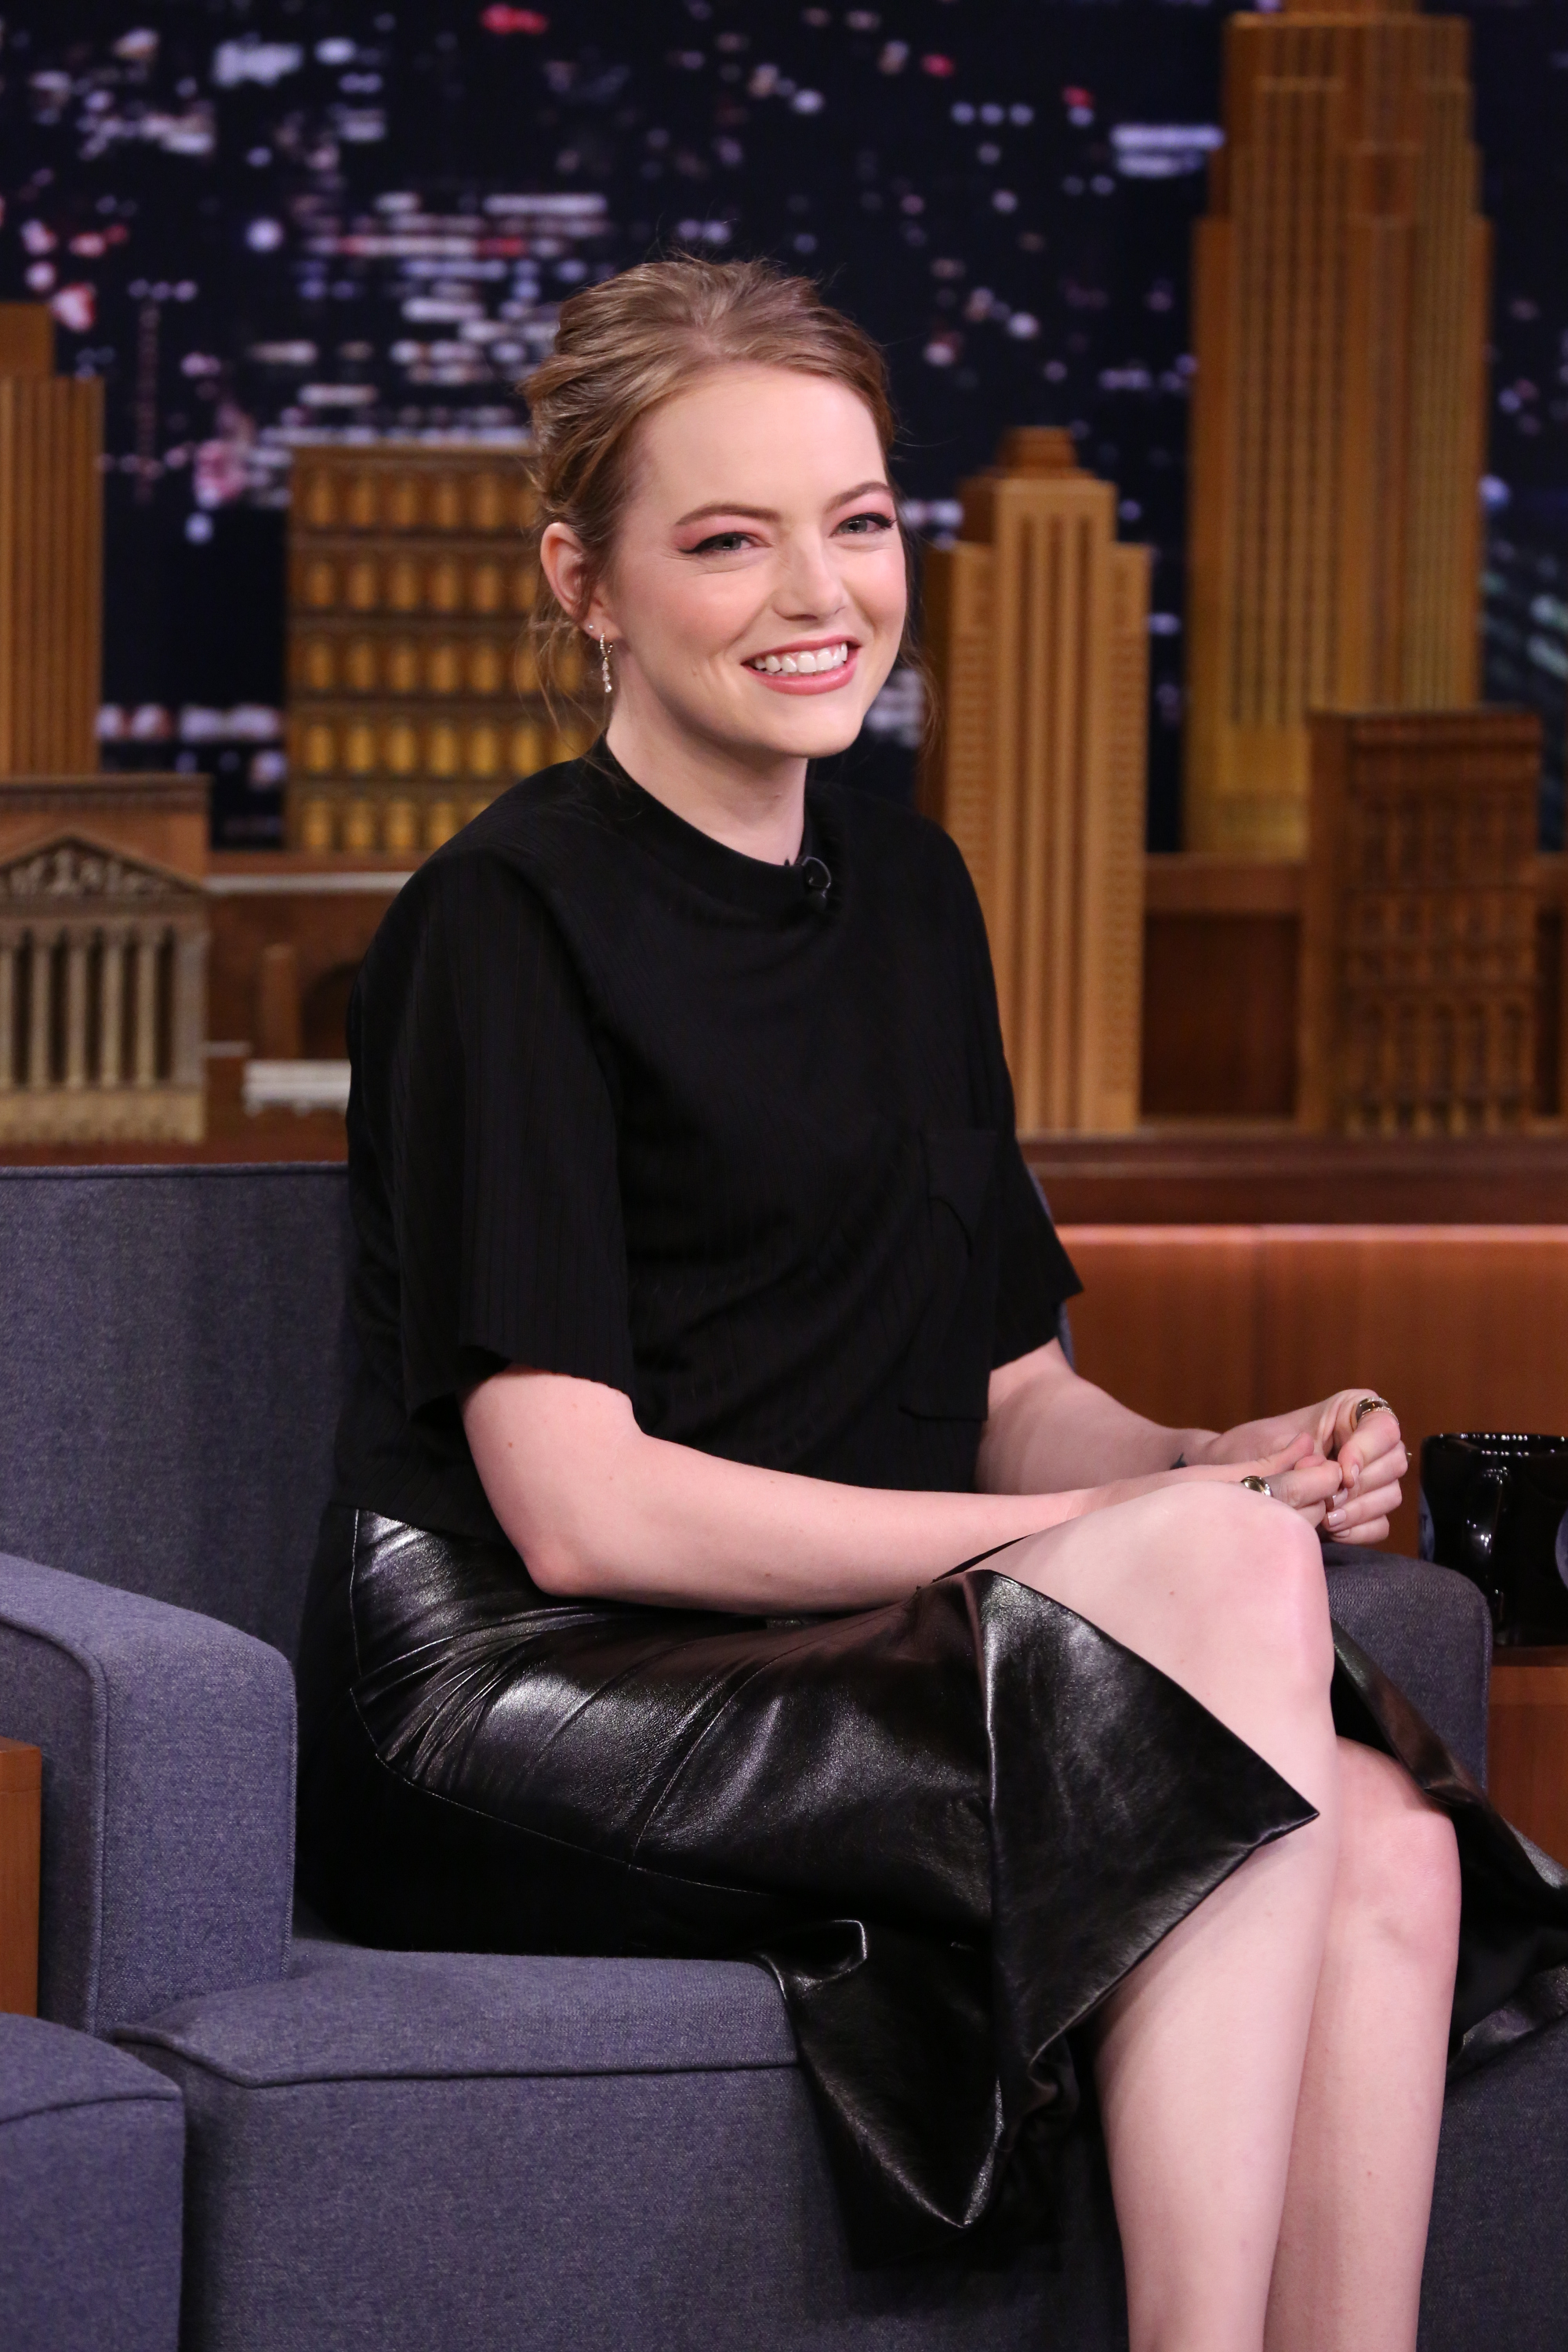 Emma Stone seated wearing a black top and leather skirt, smiling during a talk show interview